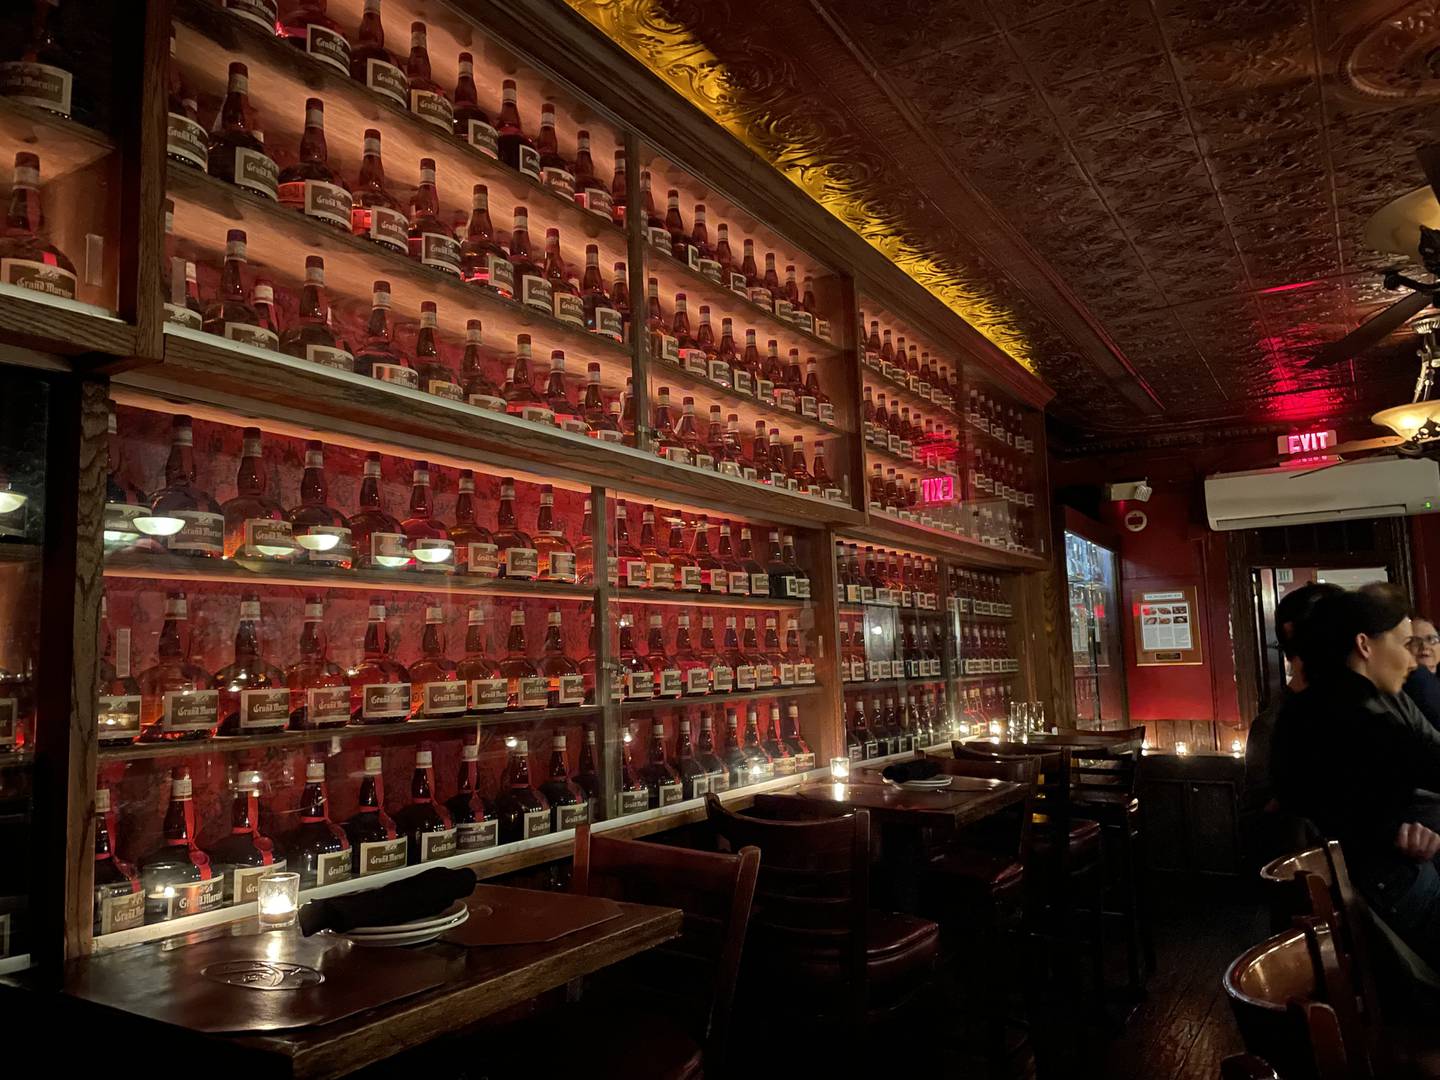 The Grand Marnier club at One-Eyed Mike's has 3,500 members.